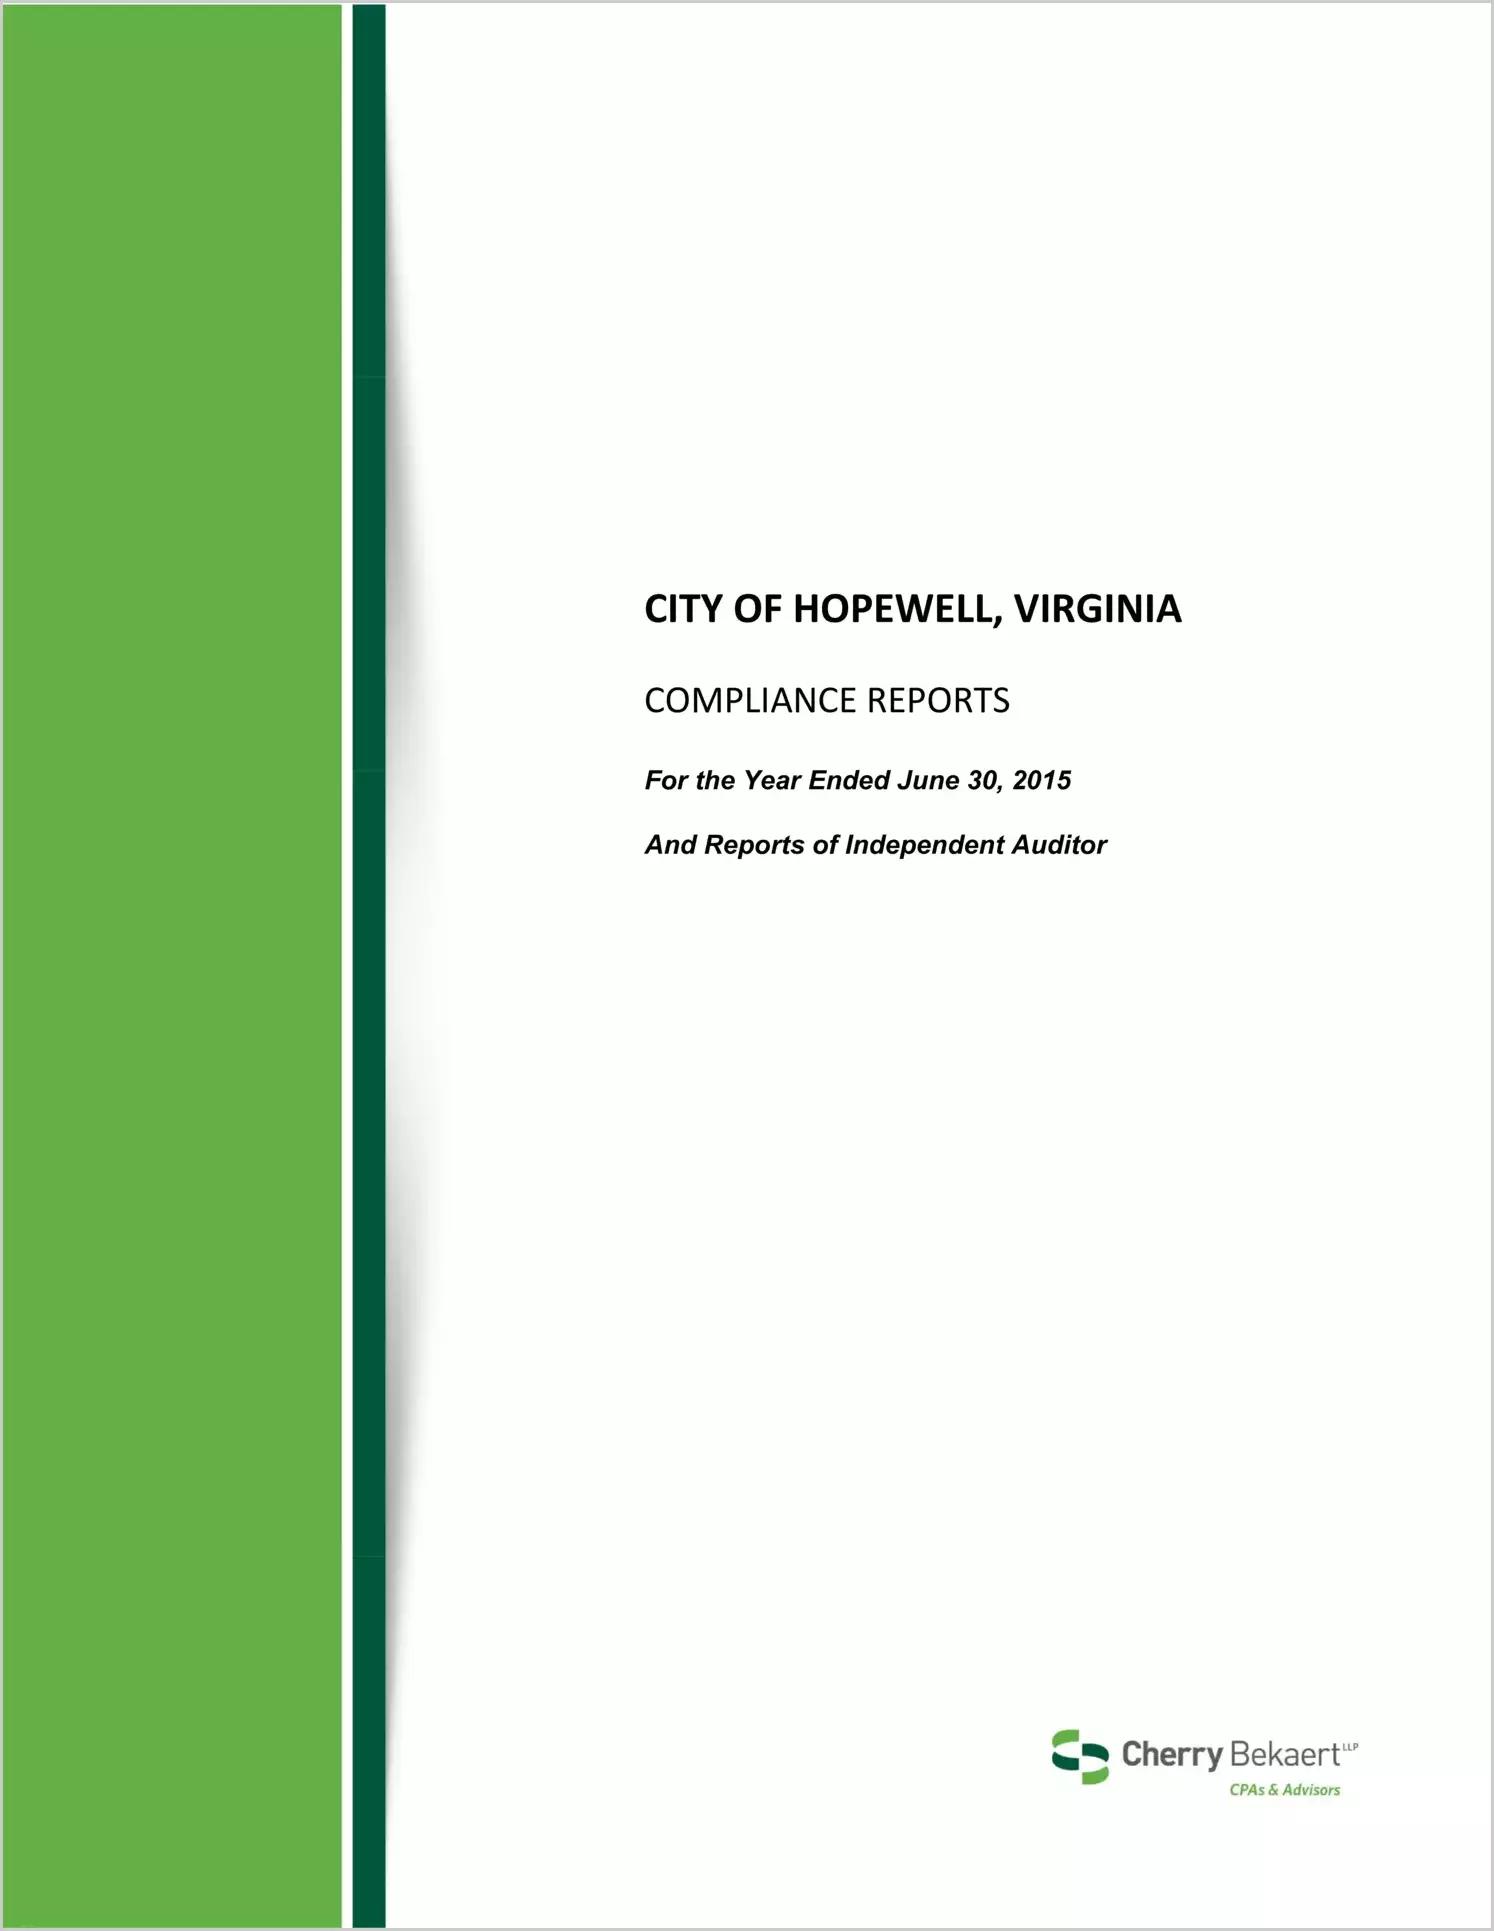 2015 Internal Control and Compliance Report for City of Hopewell